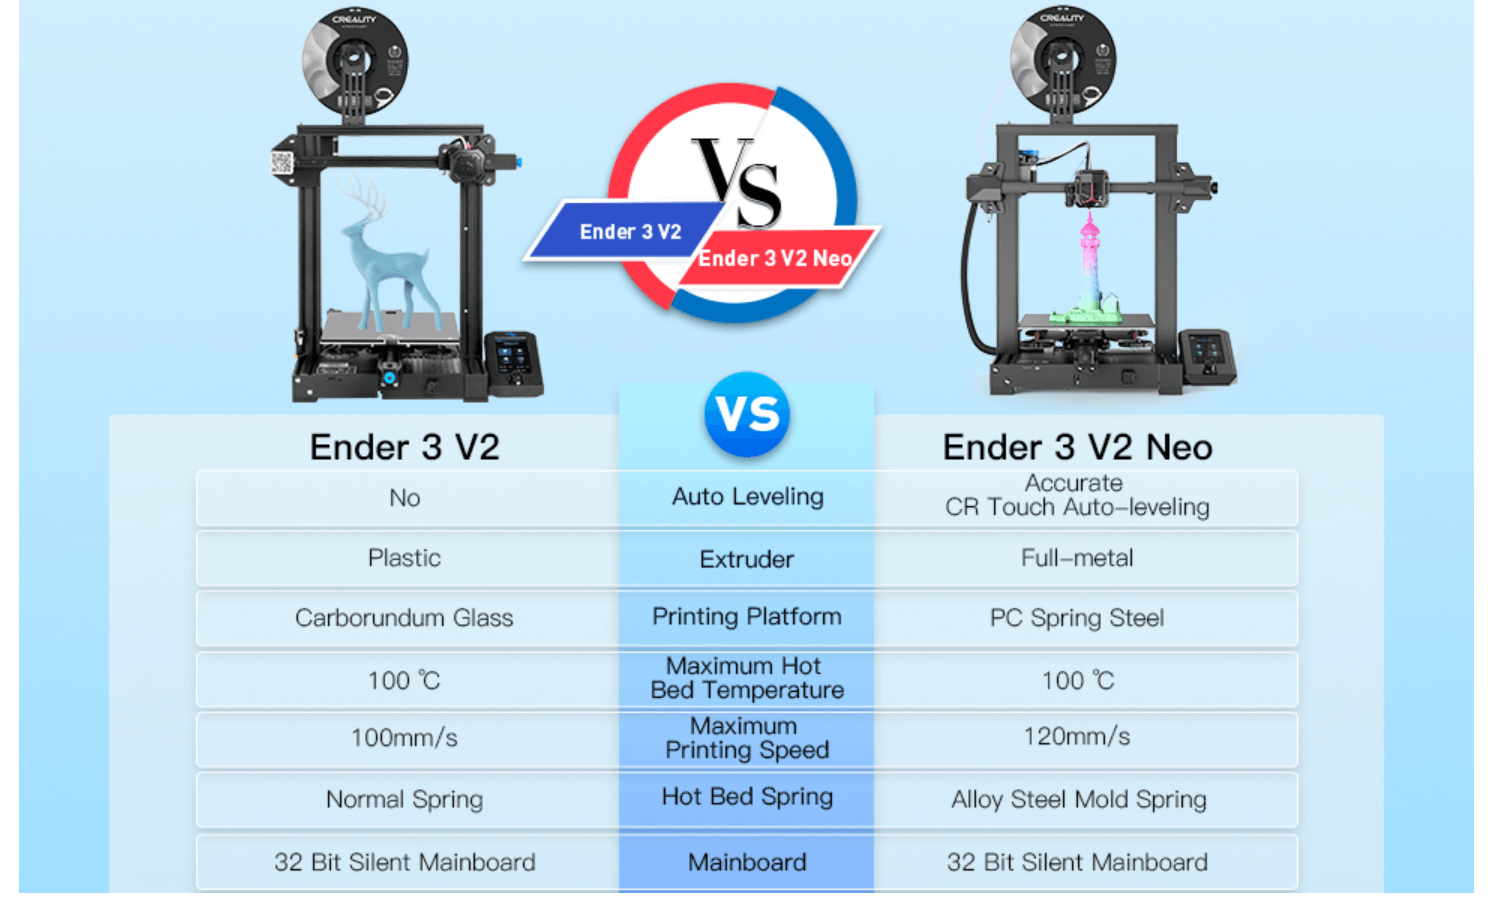 Ender 3 Neo and Ender 3 V2 Neo: the improvement of the Ender3